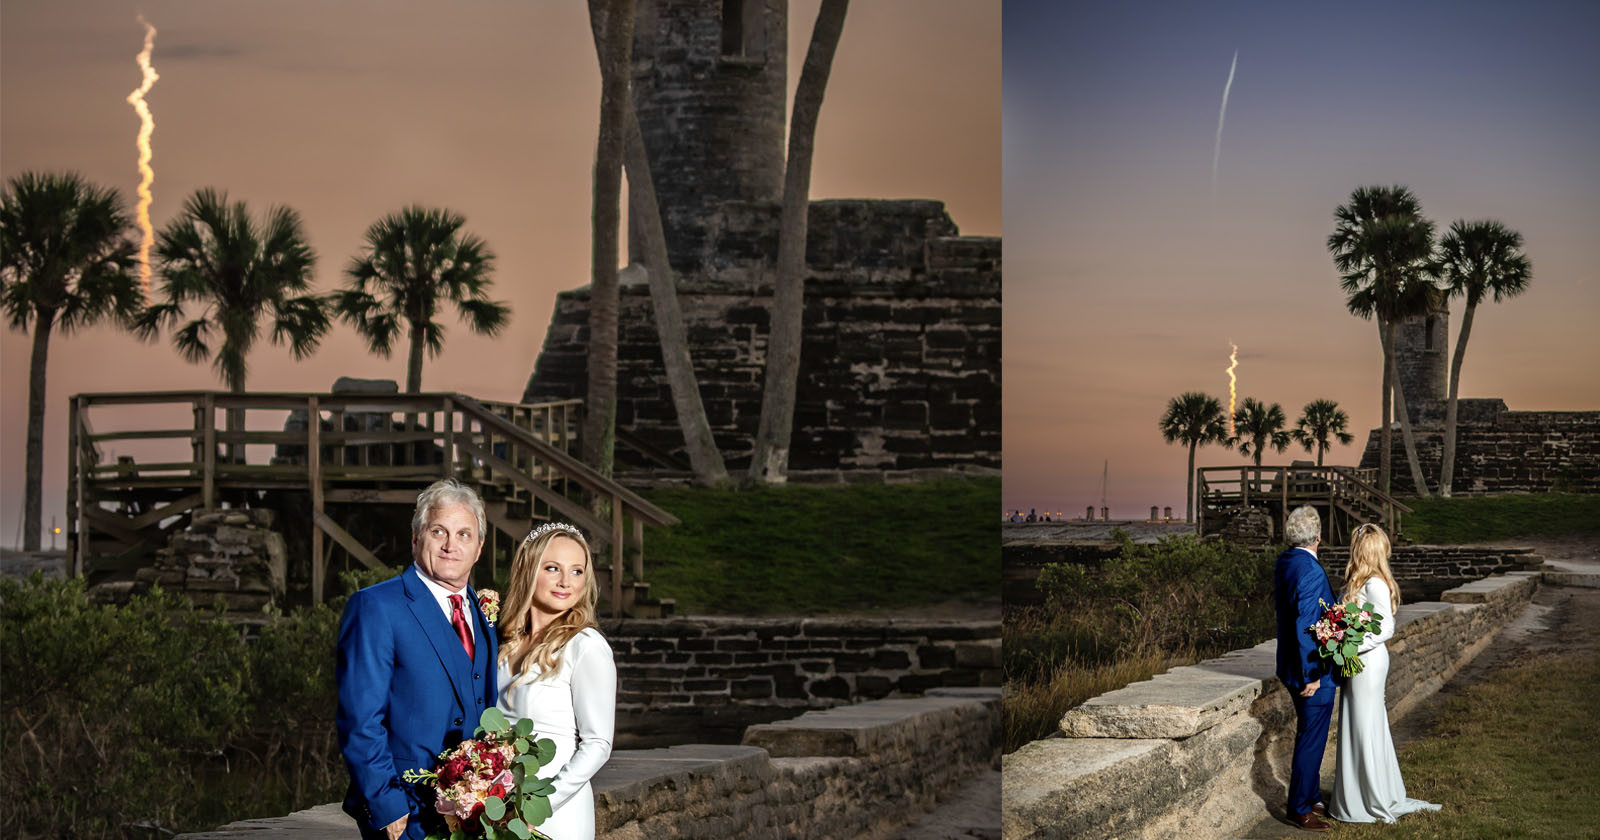  spacex rocket photobombs couple wedding picture 